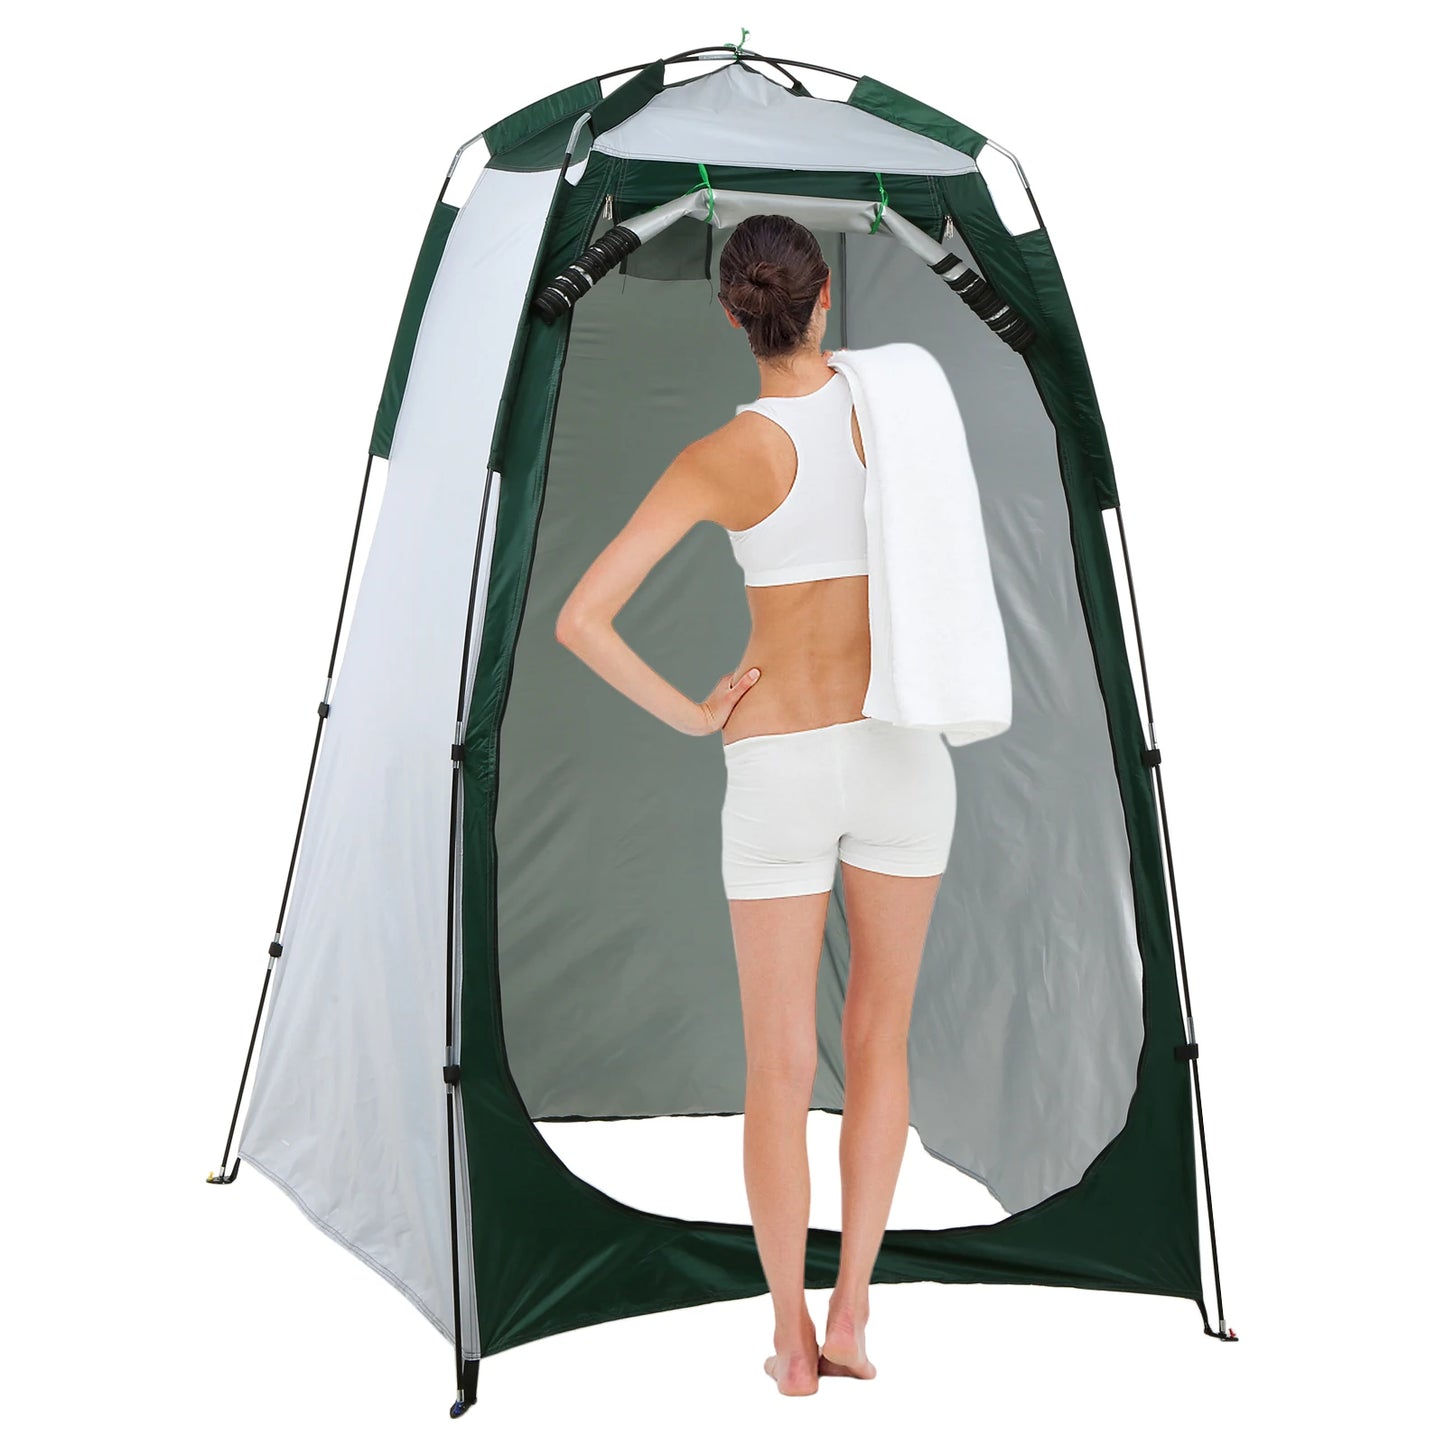 Portable Beach Shower Toilet Changing Tent Sun Rain Shelter Privacy Shelter Tent with Window for Outdoor Camping Bathroom